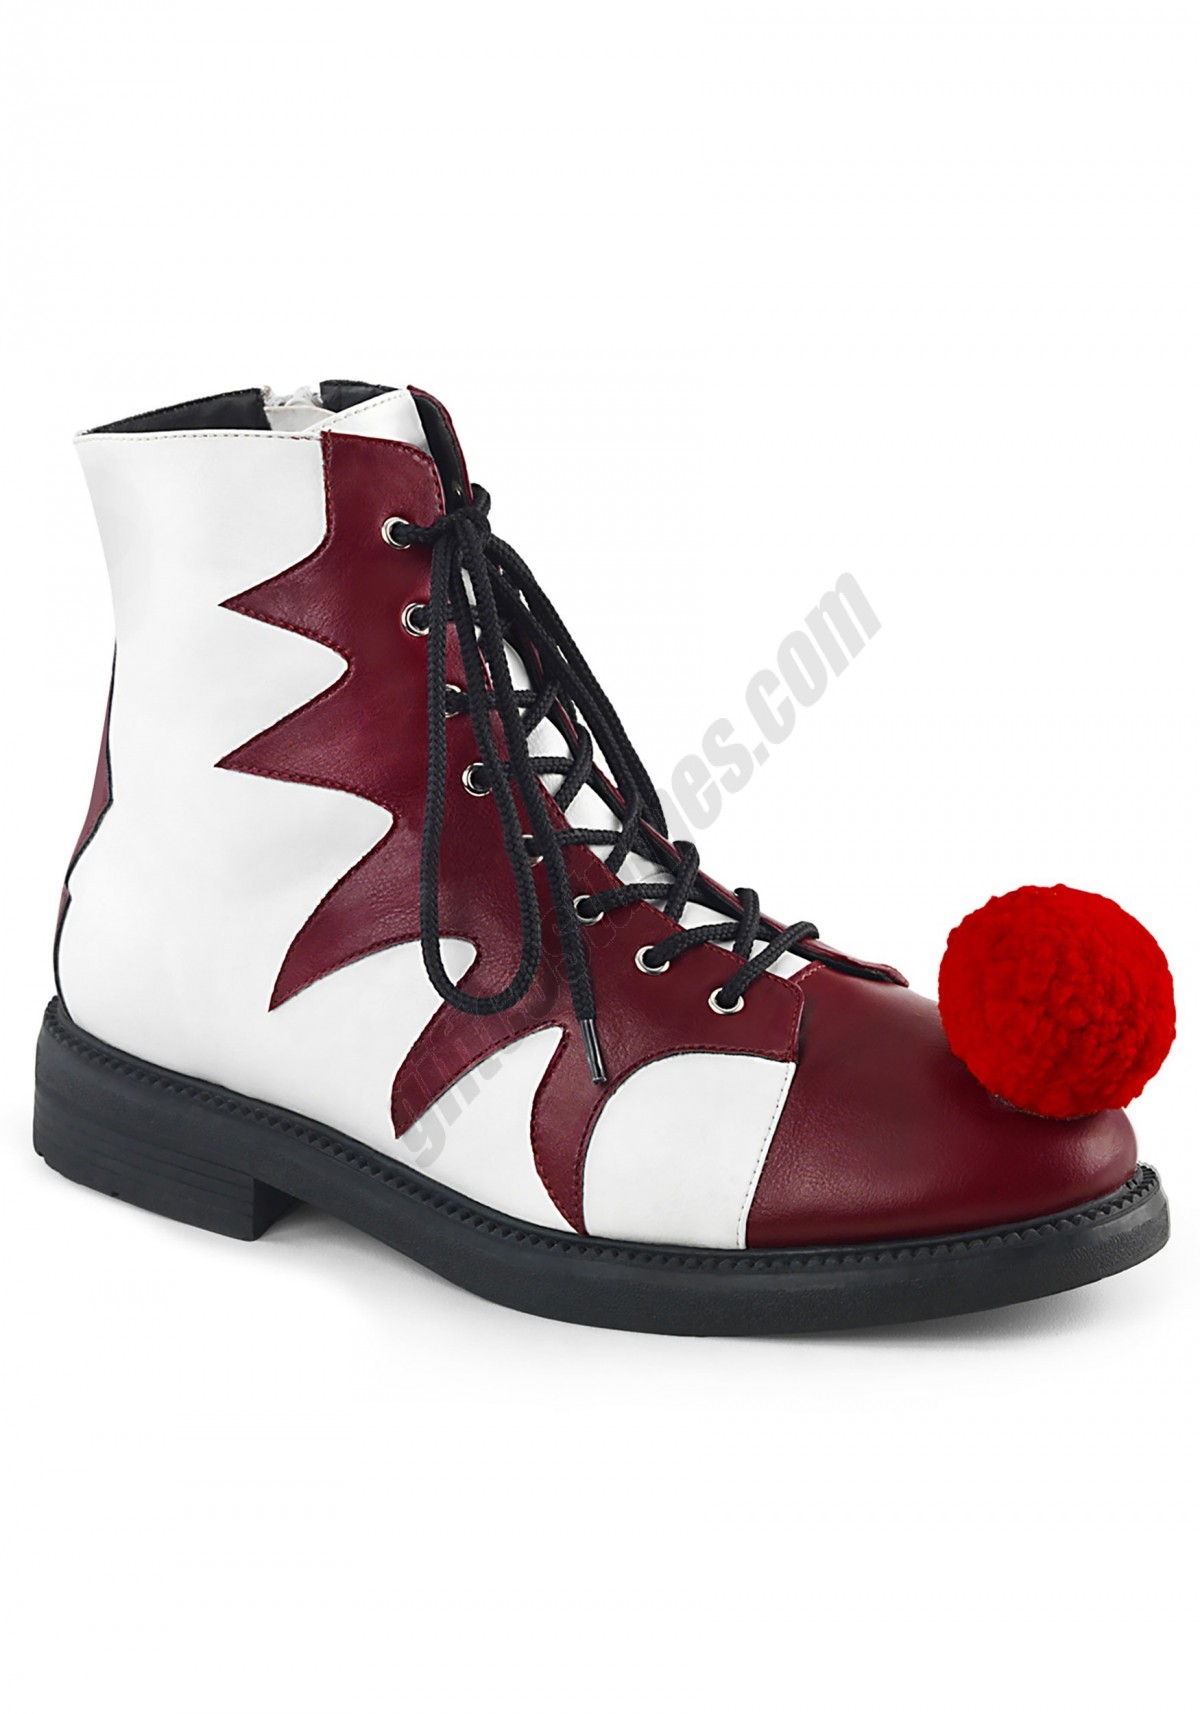 Evil Clown Shoes for Adults Promotions - -0